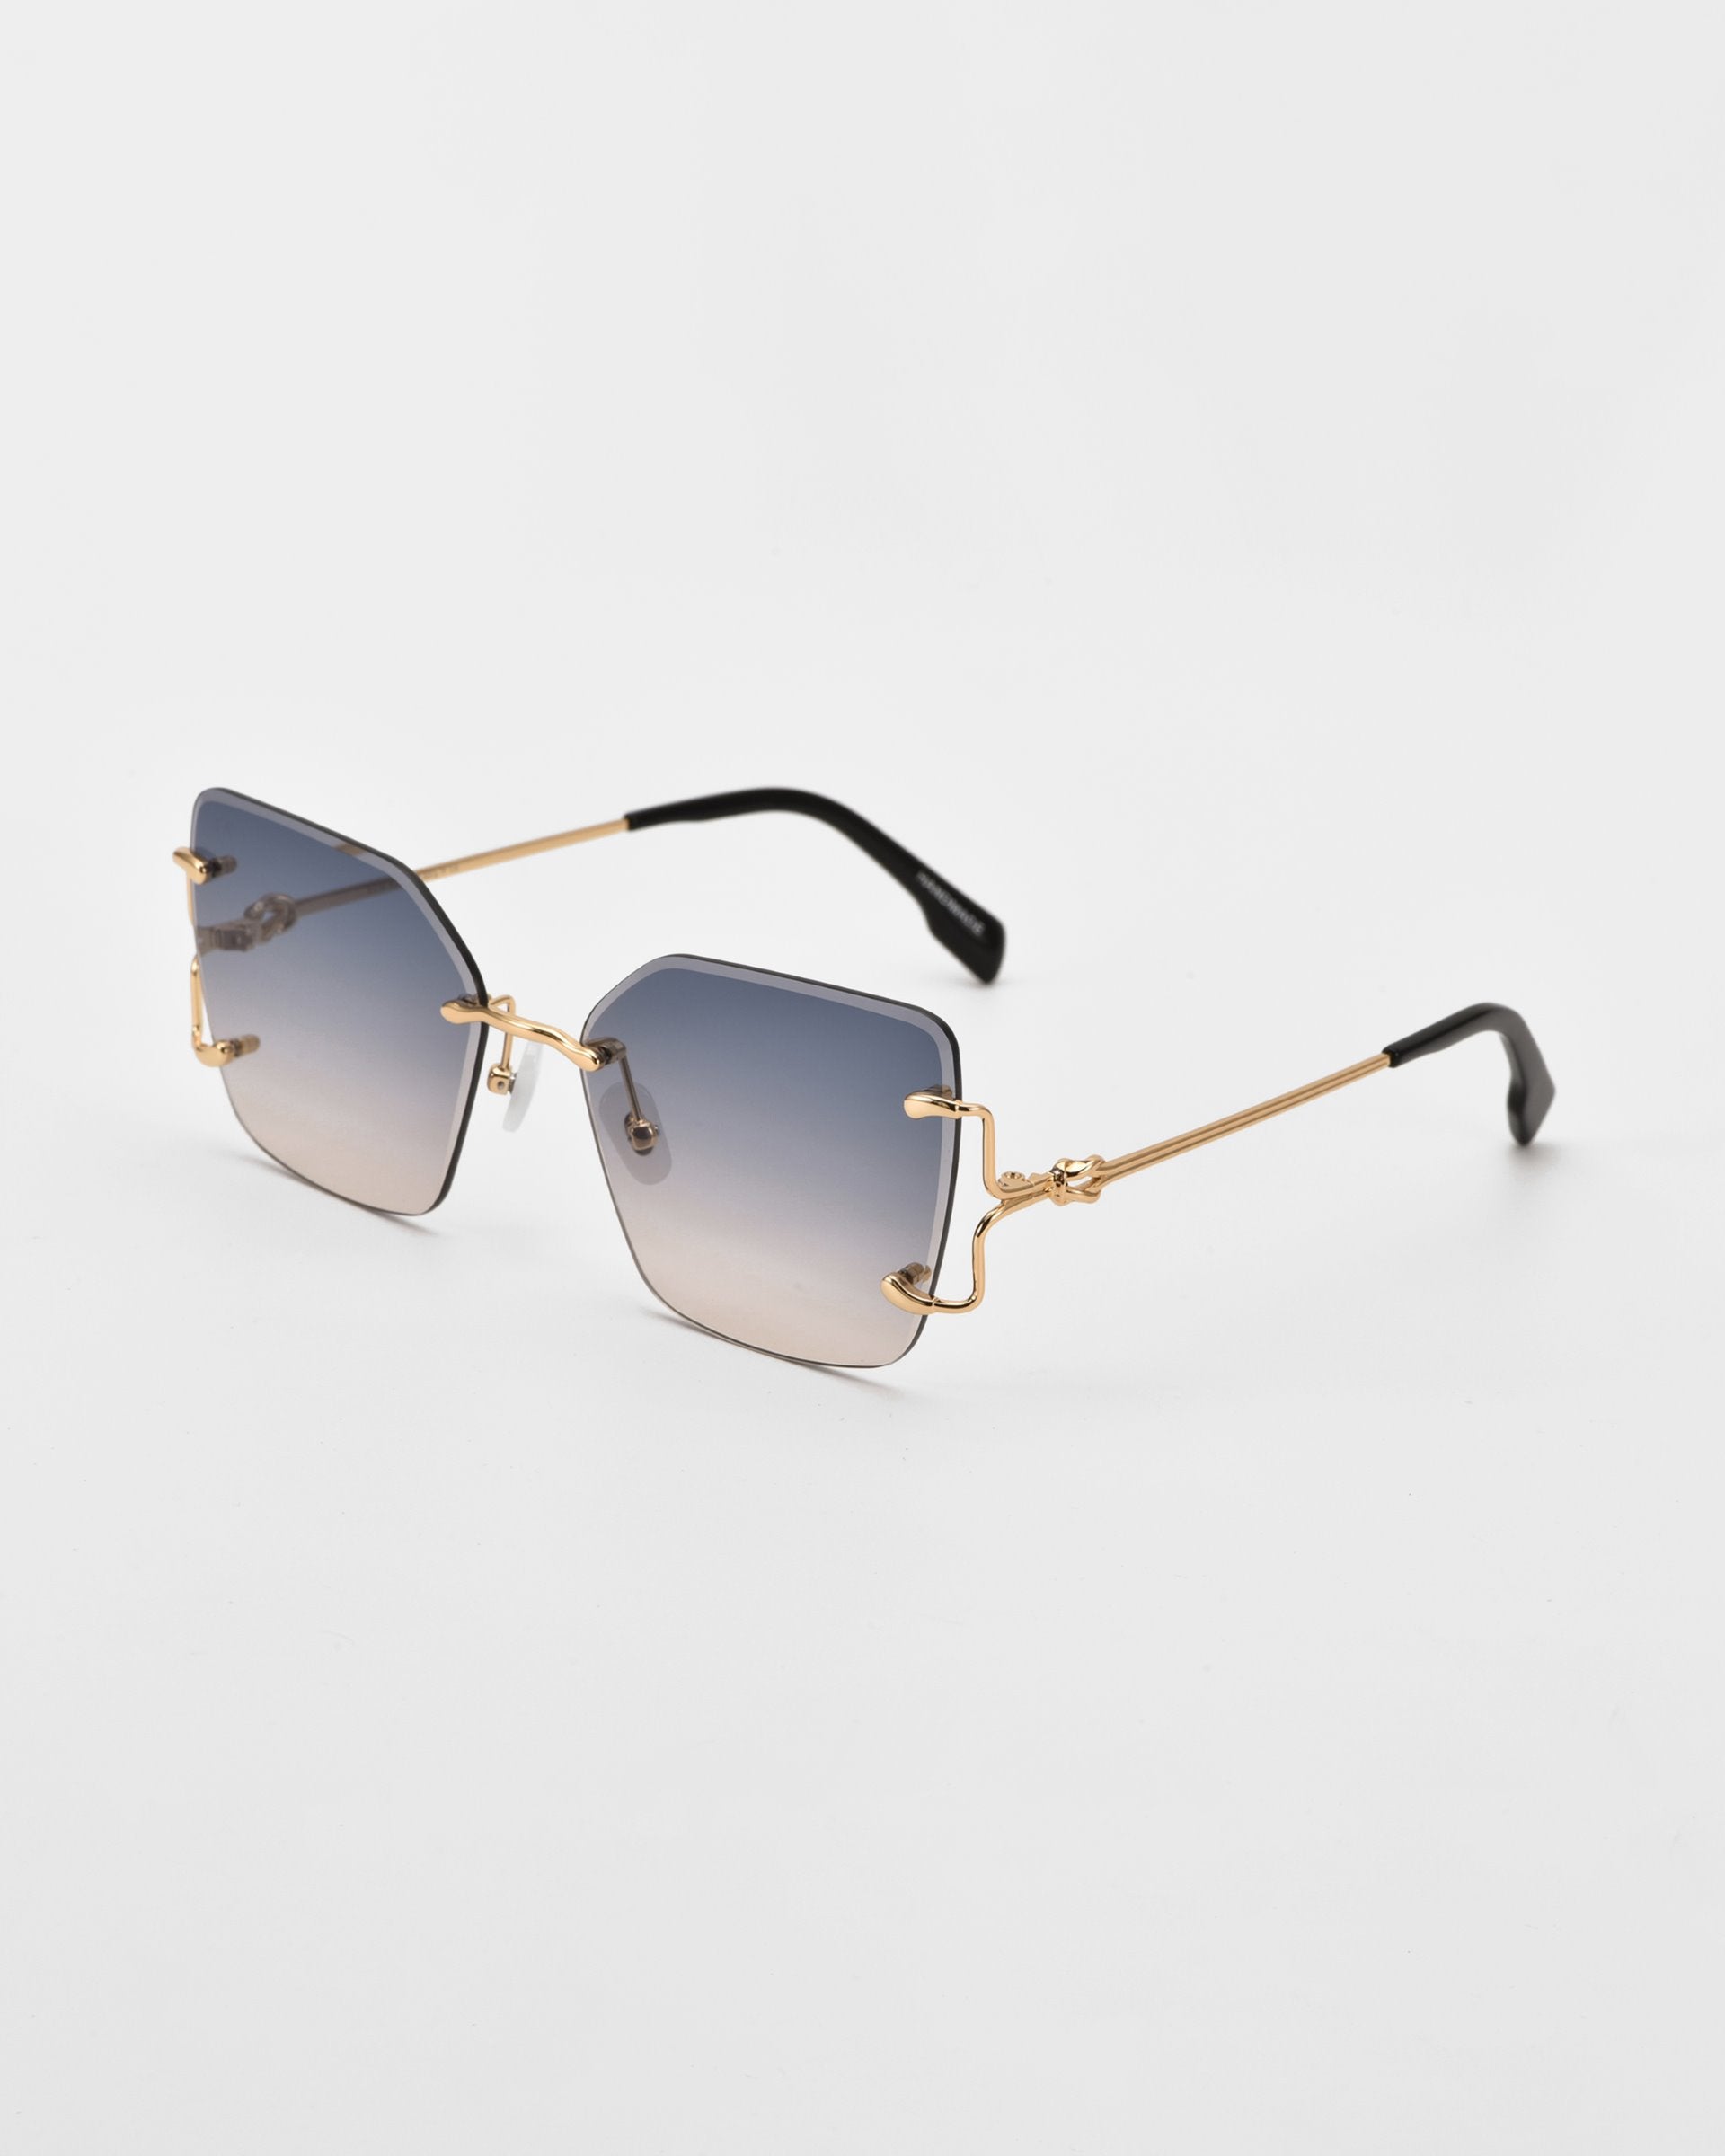 A pair of stylish For Art&#39;s Sake® Starlit sunglasses with gradient lenses transitioning from dark at the top to lighter at the bottom. They feature thin, gold-toned metal arms and uniquely shaped, rimless square frames. Jade-stone nosepads add a touch of elegance against the plain white background.